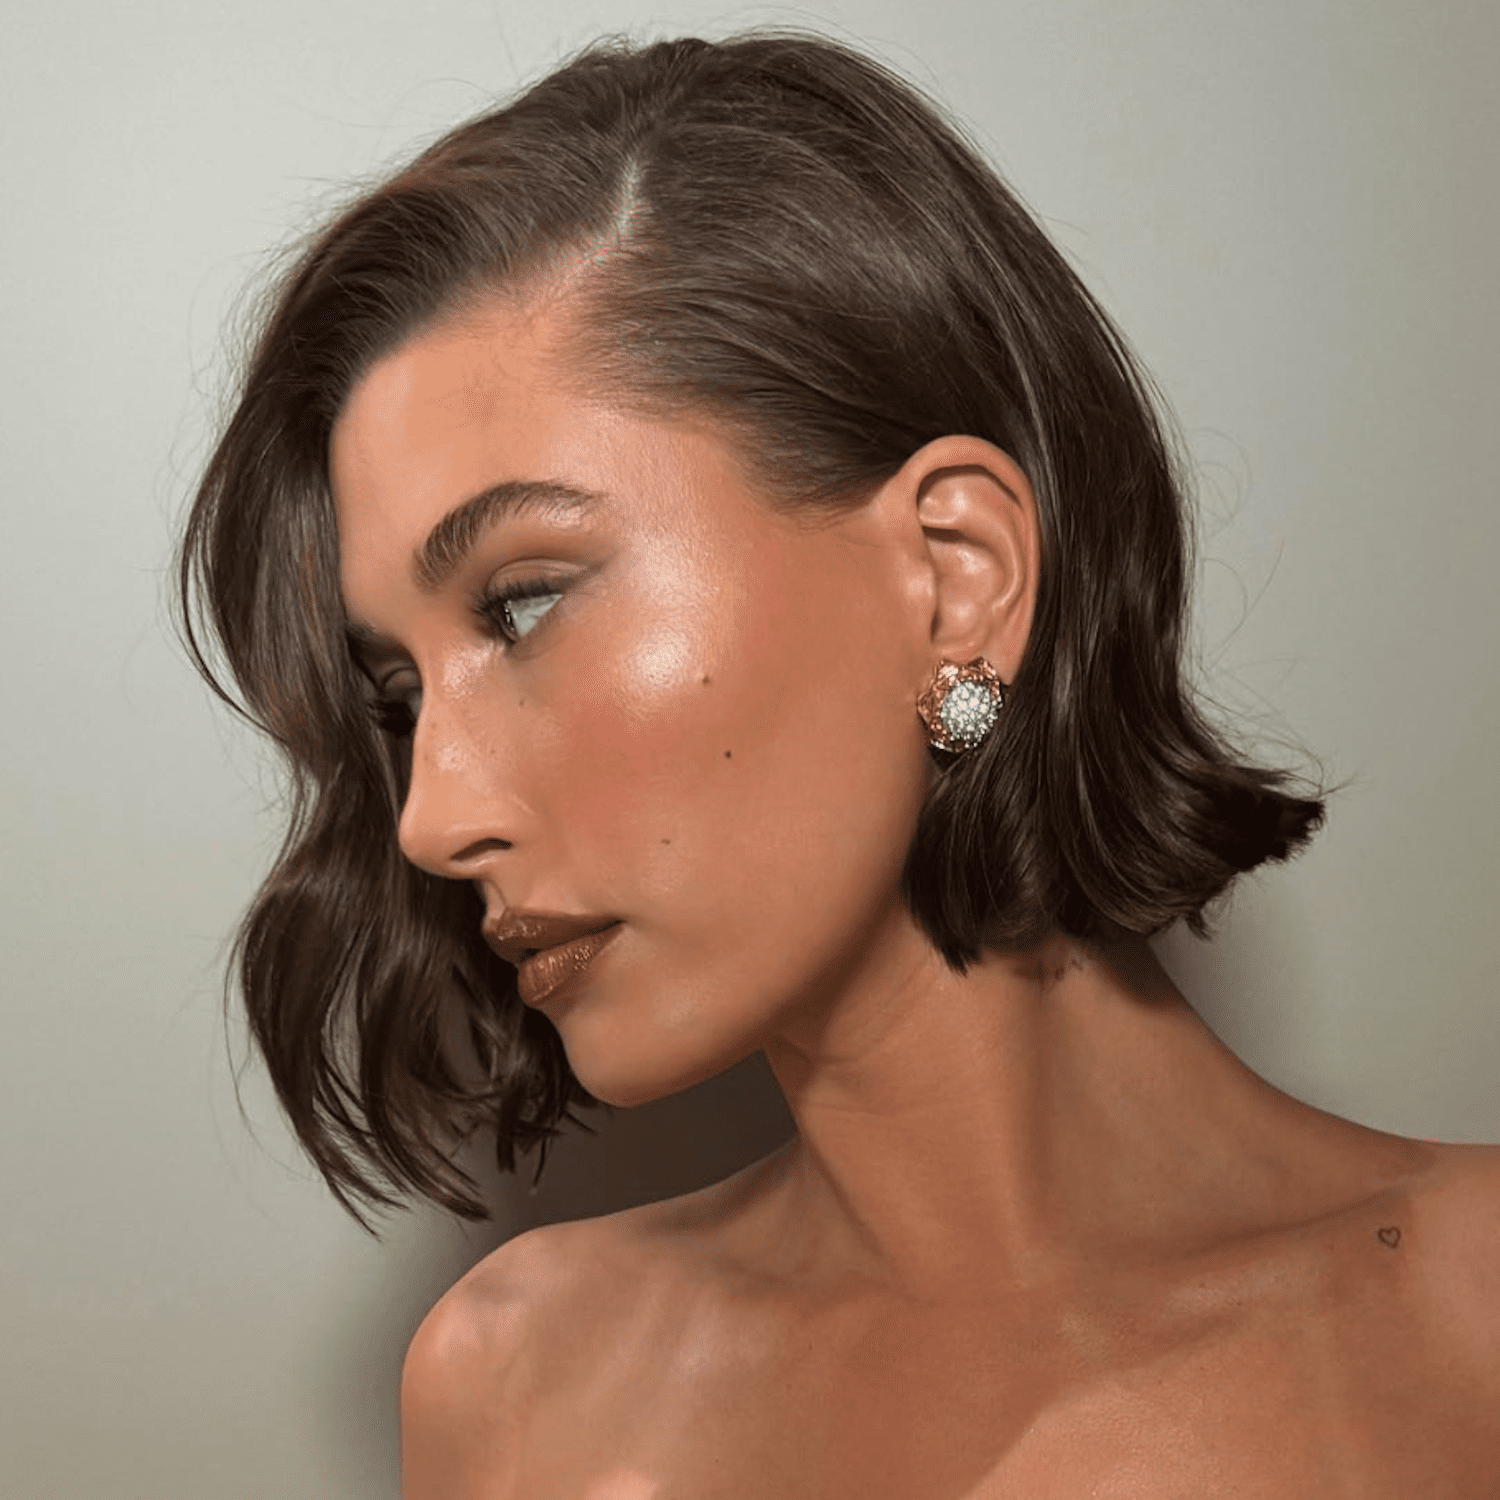 Hailey Bieber in a softly curled bob with a subtle zig zag parting